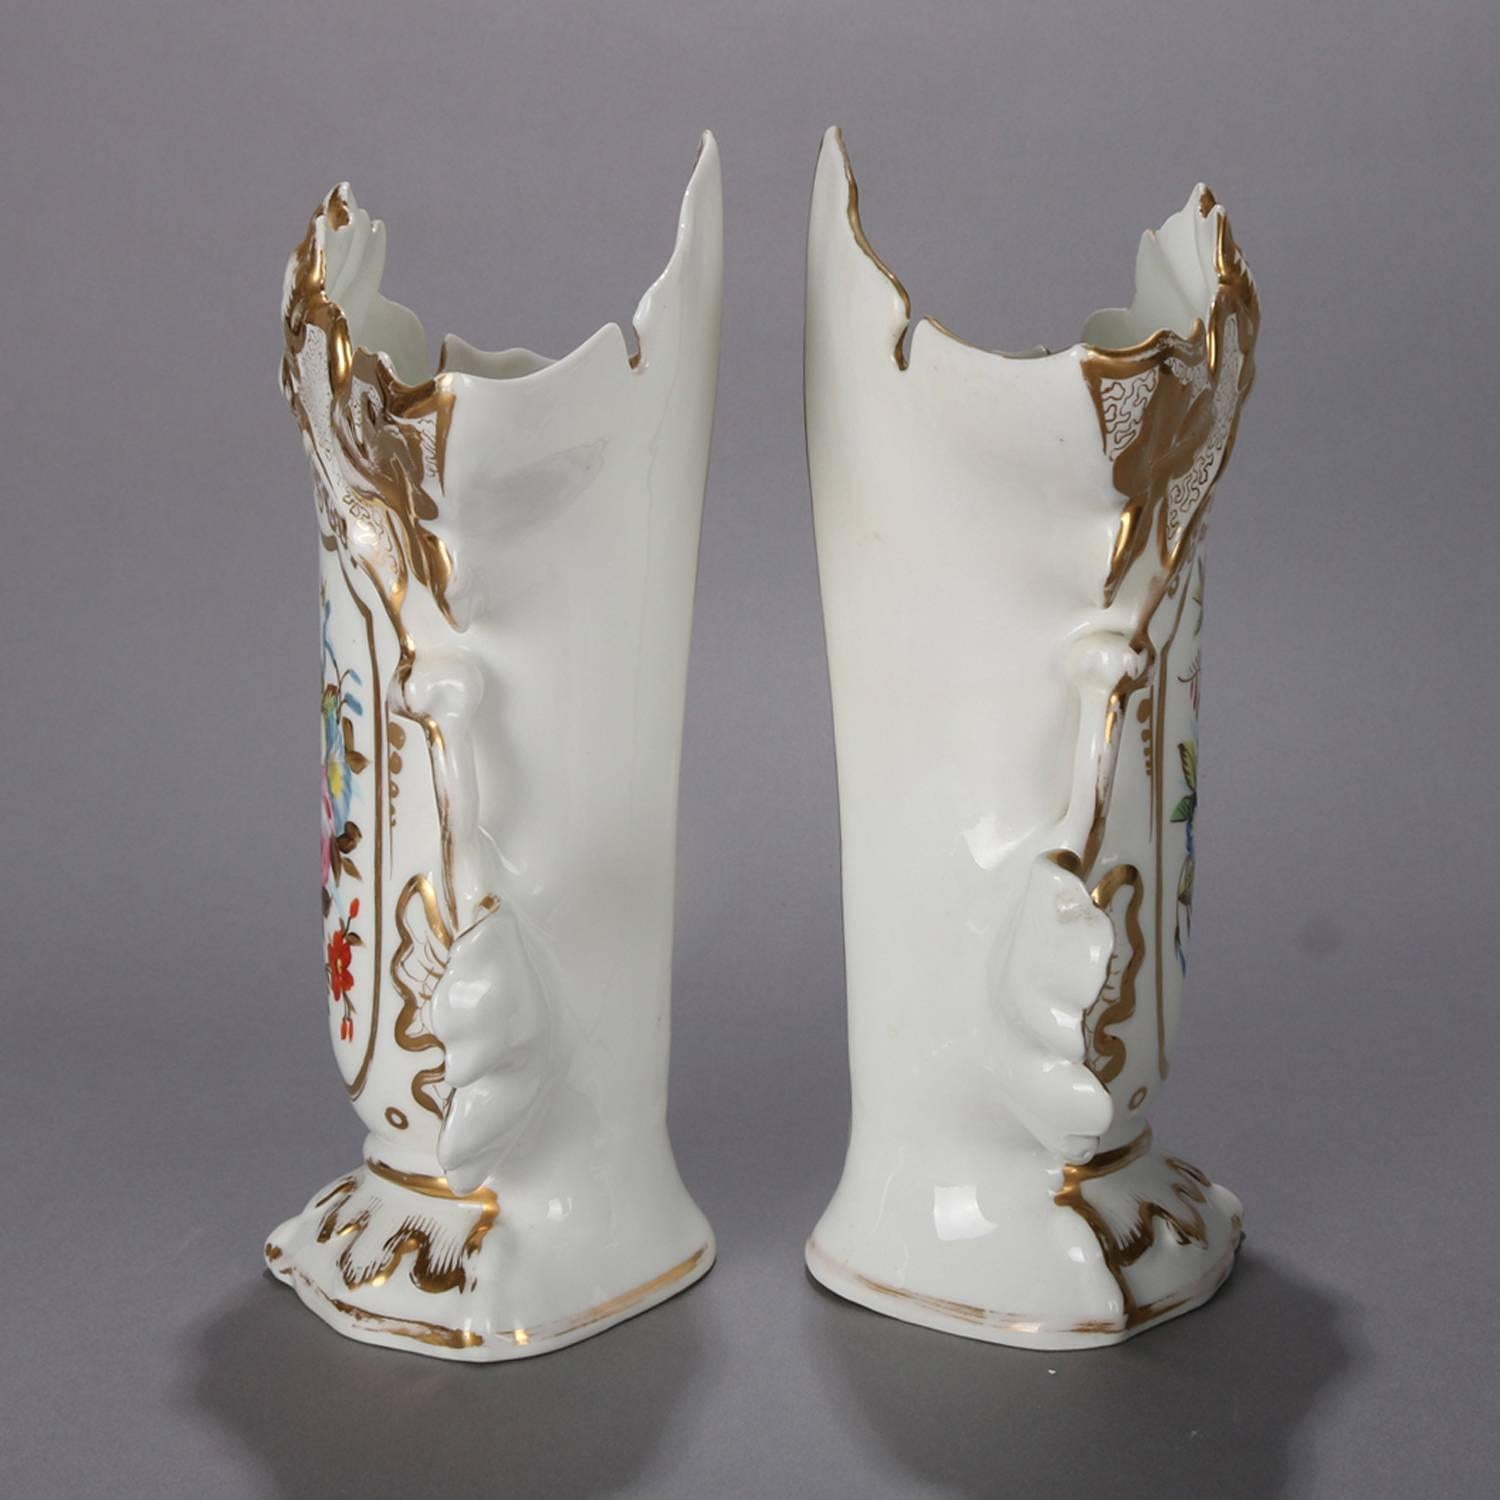 19th Century Pair of Antique Hand-Painted and Gilt Floral Old Paris Porcelain Spill Vases